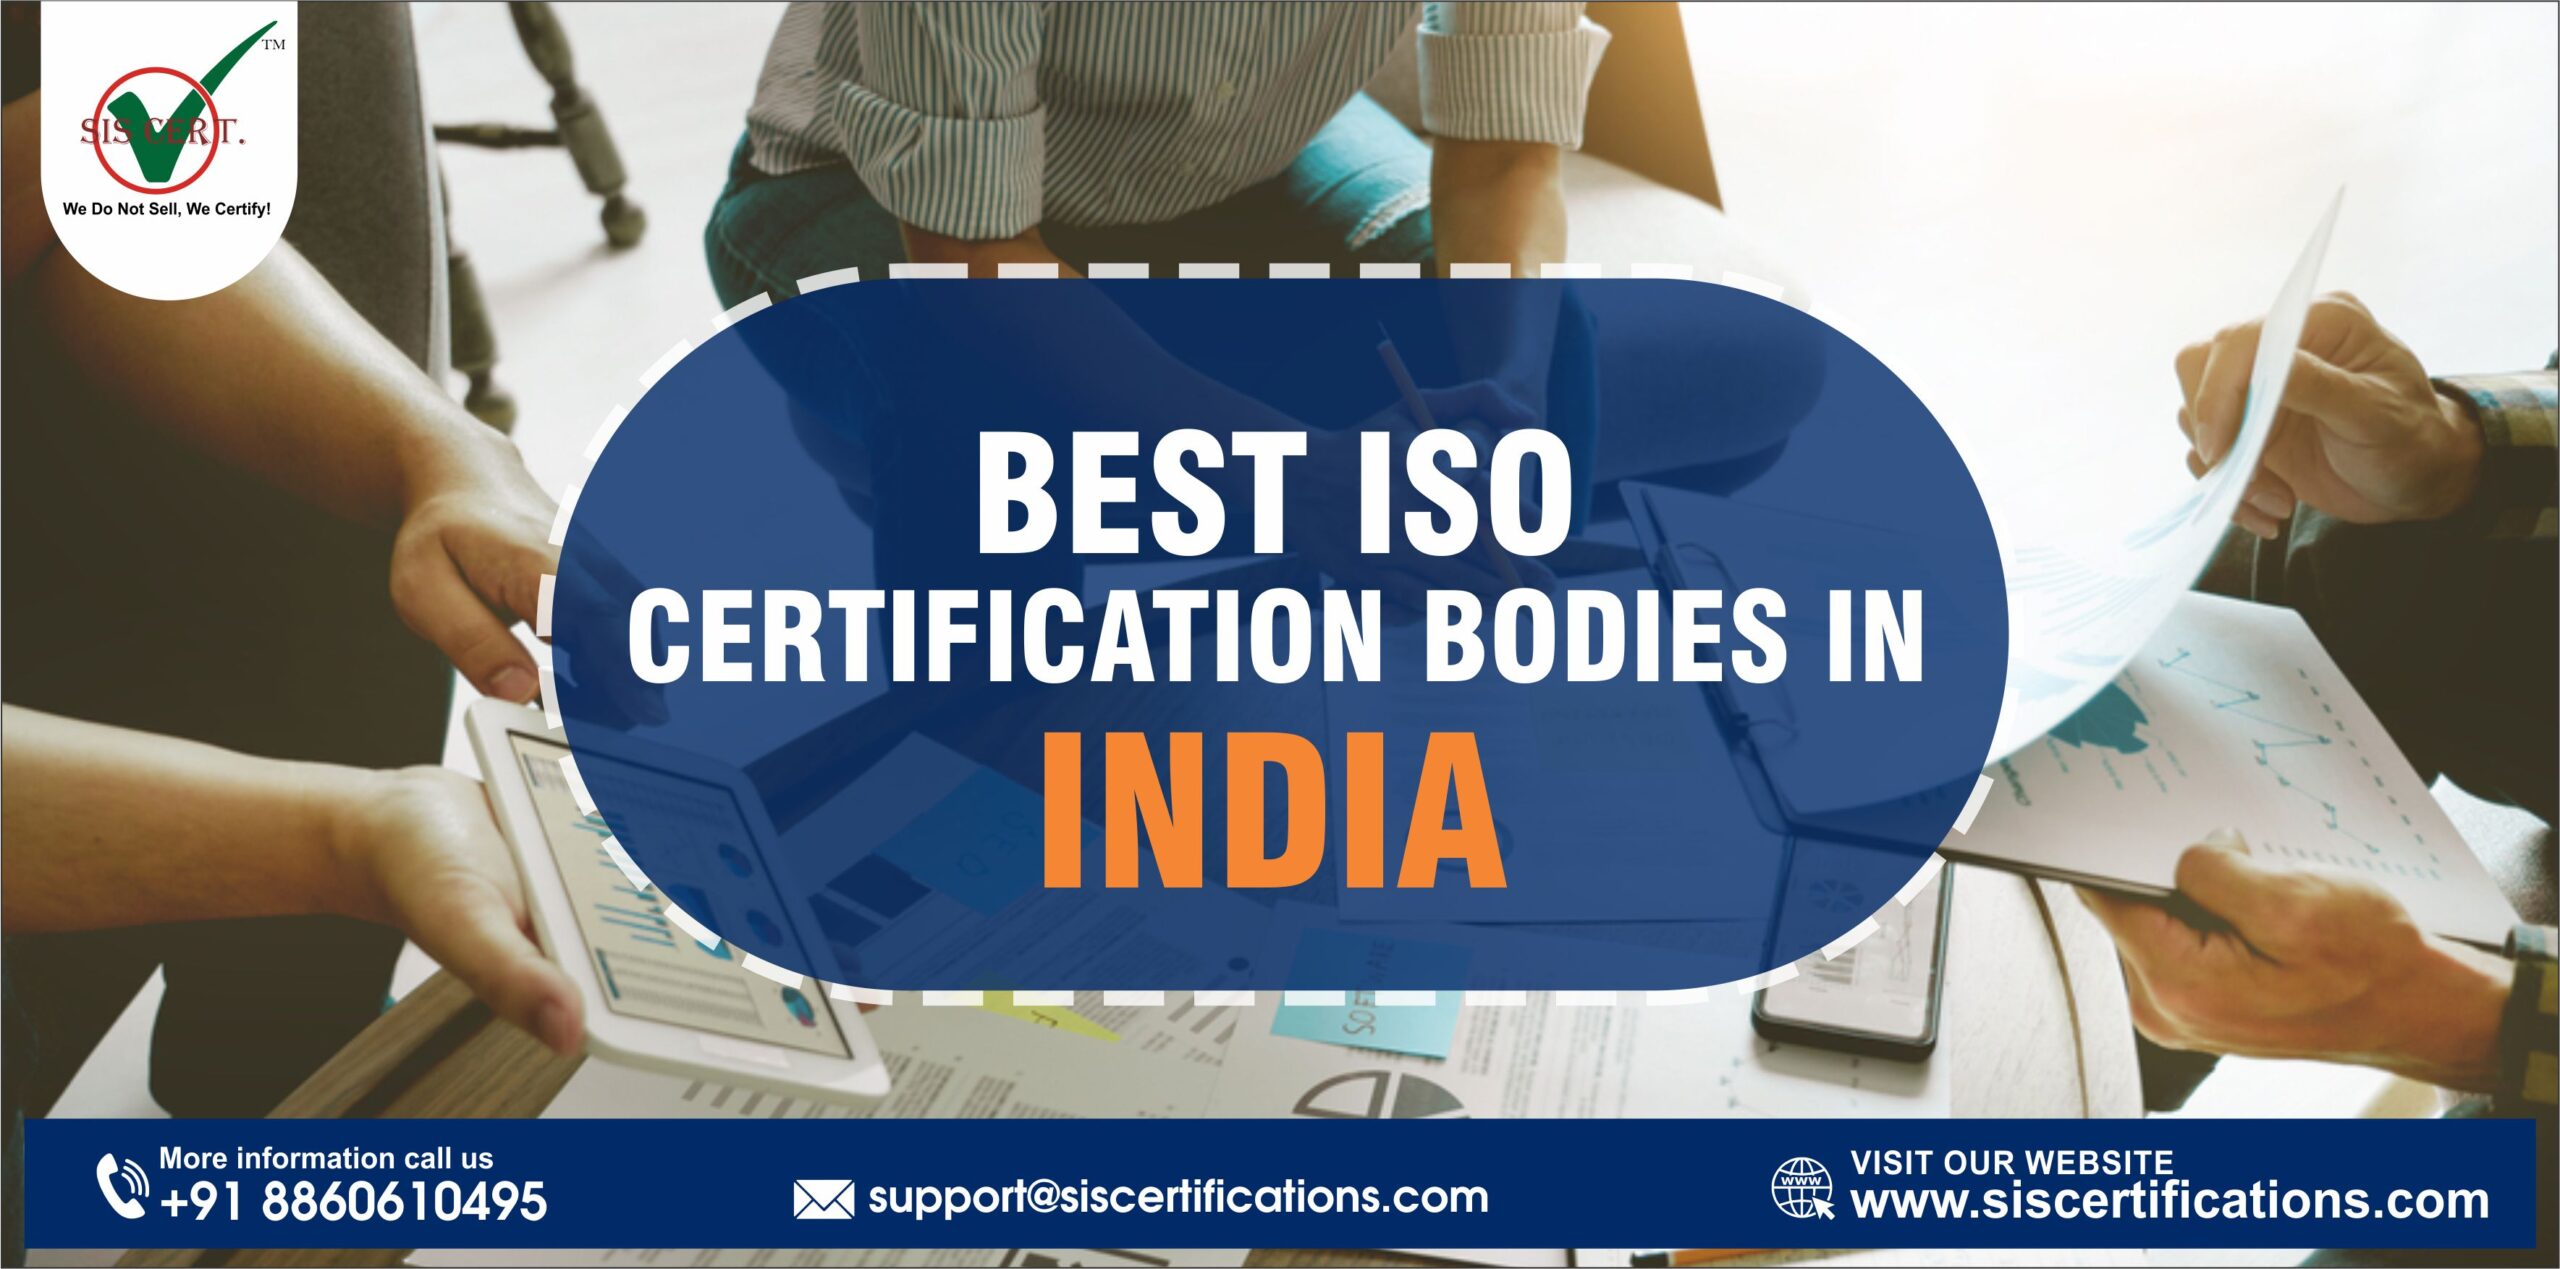 Best ISO Certification Bodies in India